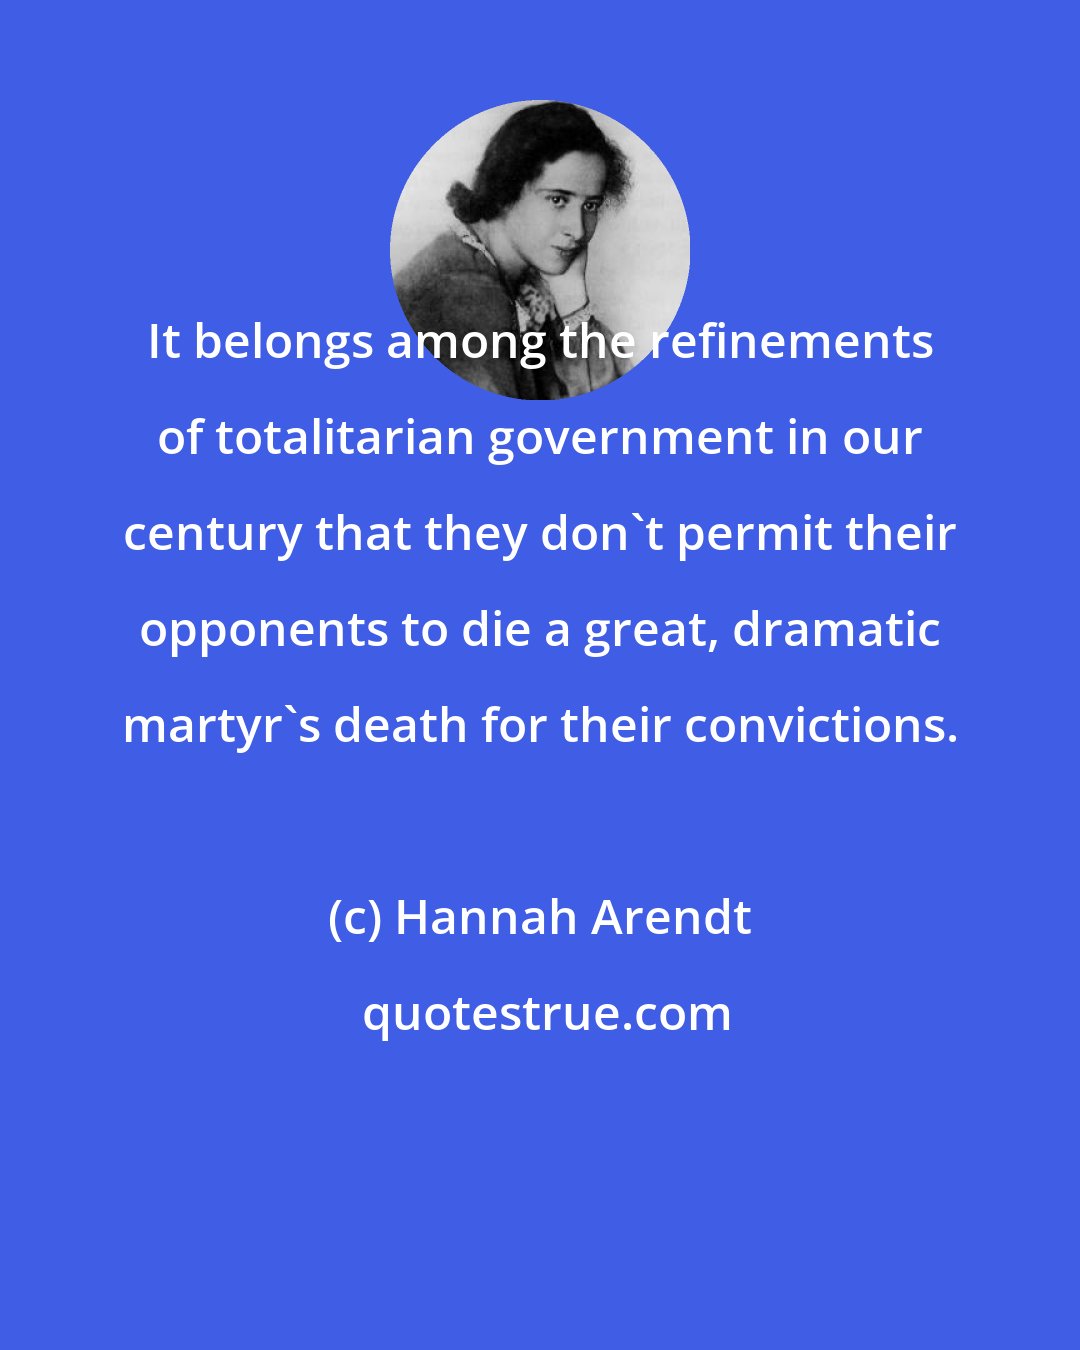 Hannah Arendt: It belongs among the refinements of totalitarian government in our century that they don't permit their opponents to die a great, dramatic martyr's death for their convictions.